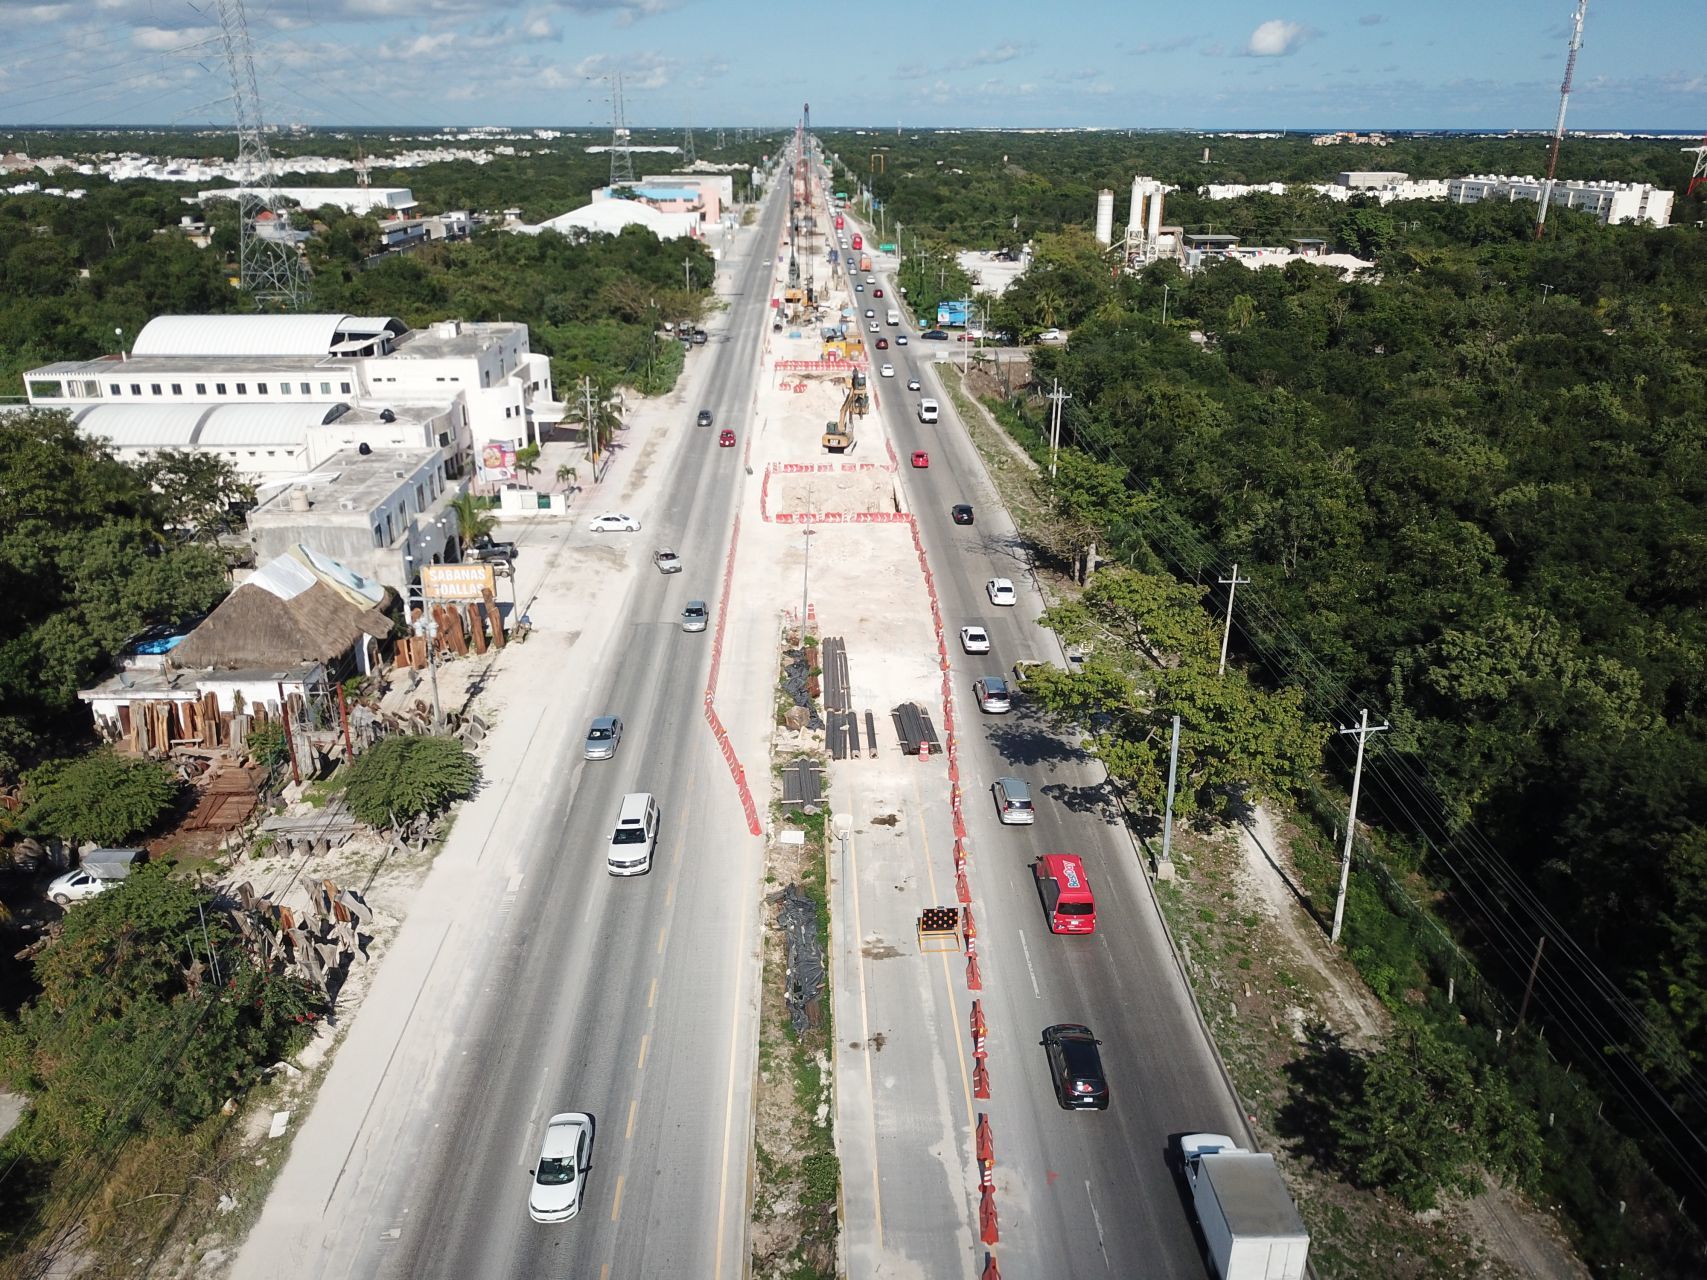 The Government granted the construction to the Sedena of Section 5 that runs from Tulum to Ciudad del Carmen, in Quintana Roo.  (ELIZABETH RUIZ/CUARTOSCURO.COM)